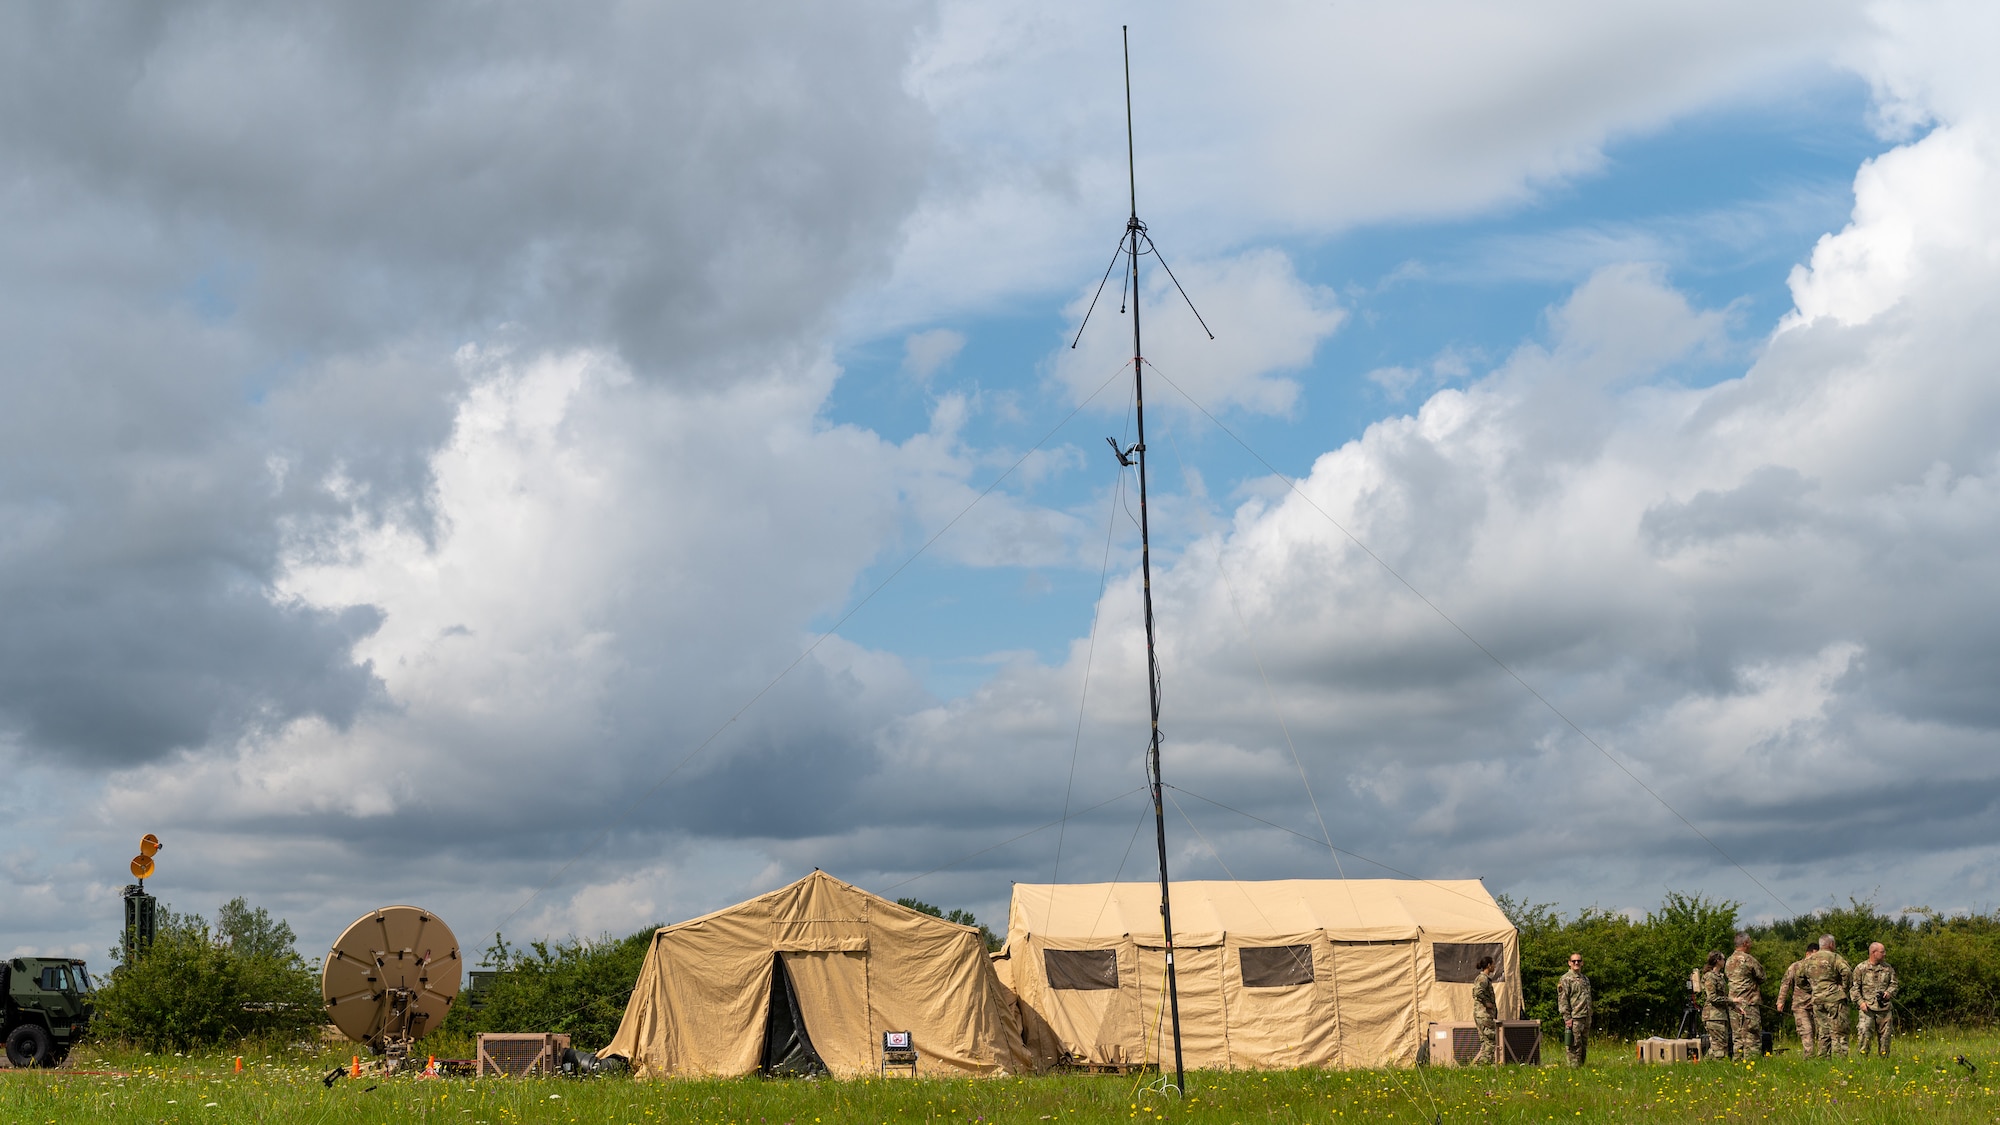 A distant view of Airmen standing next to tents and antenna.